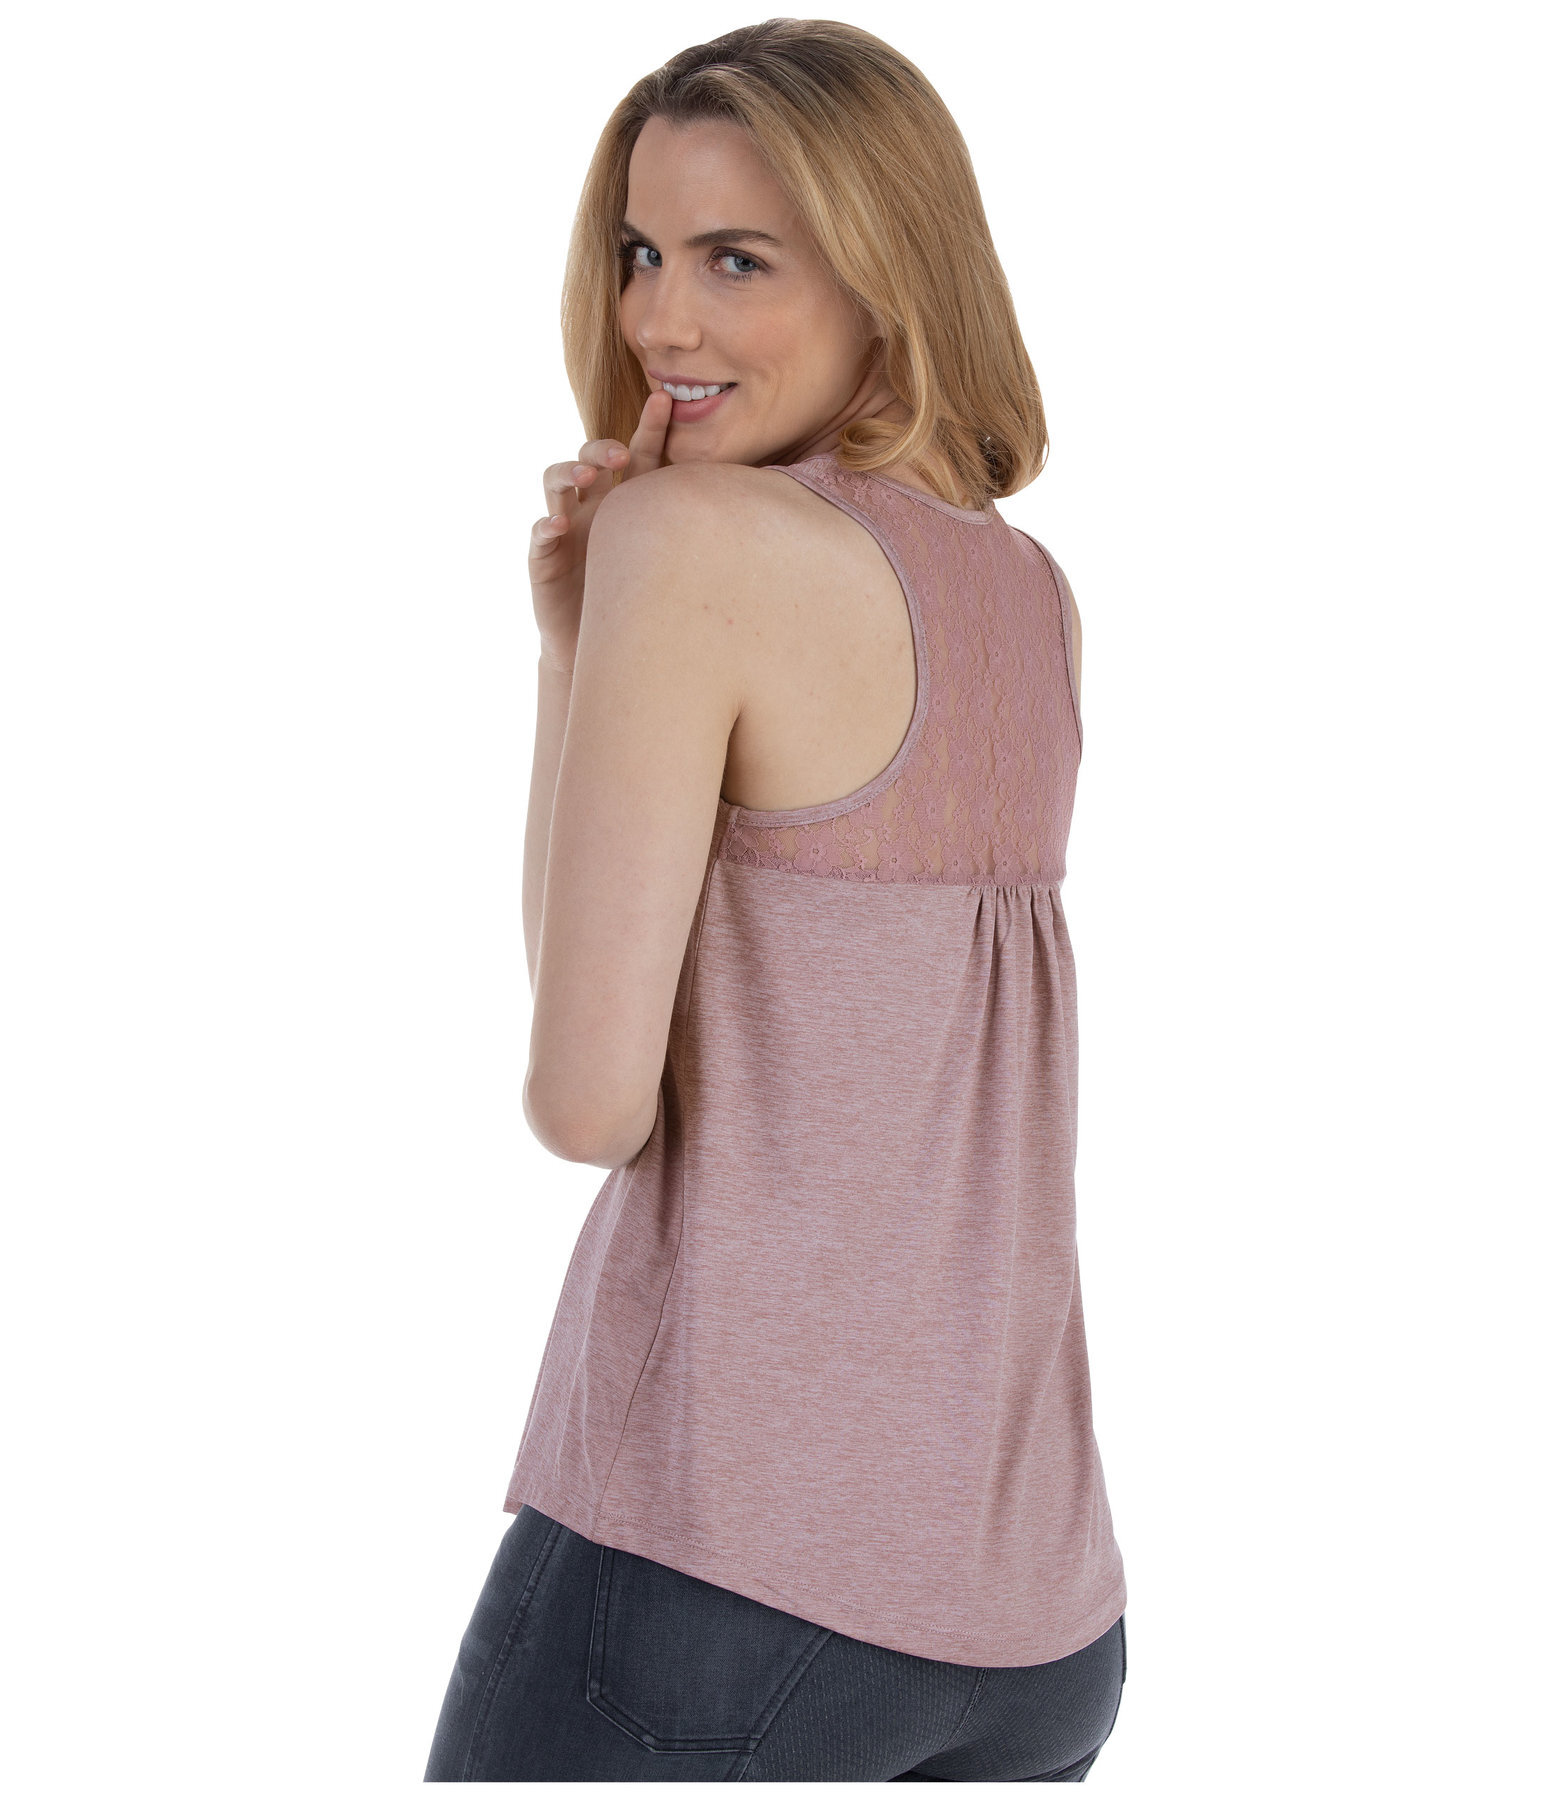 Funktions-Tank-Top Lotte